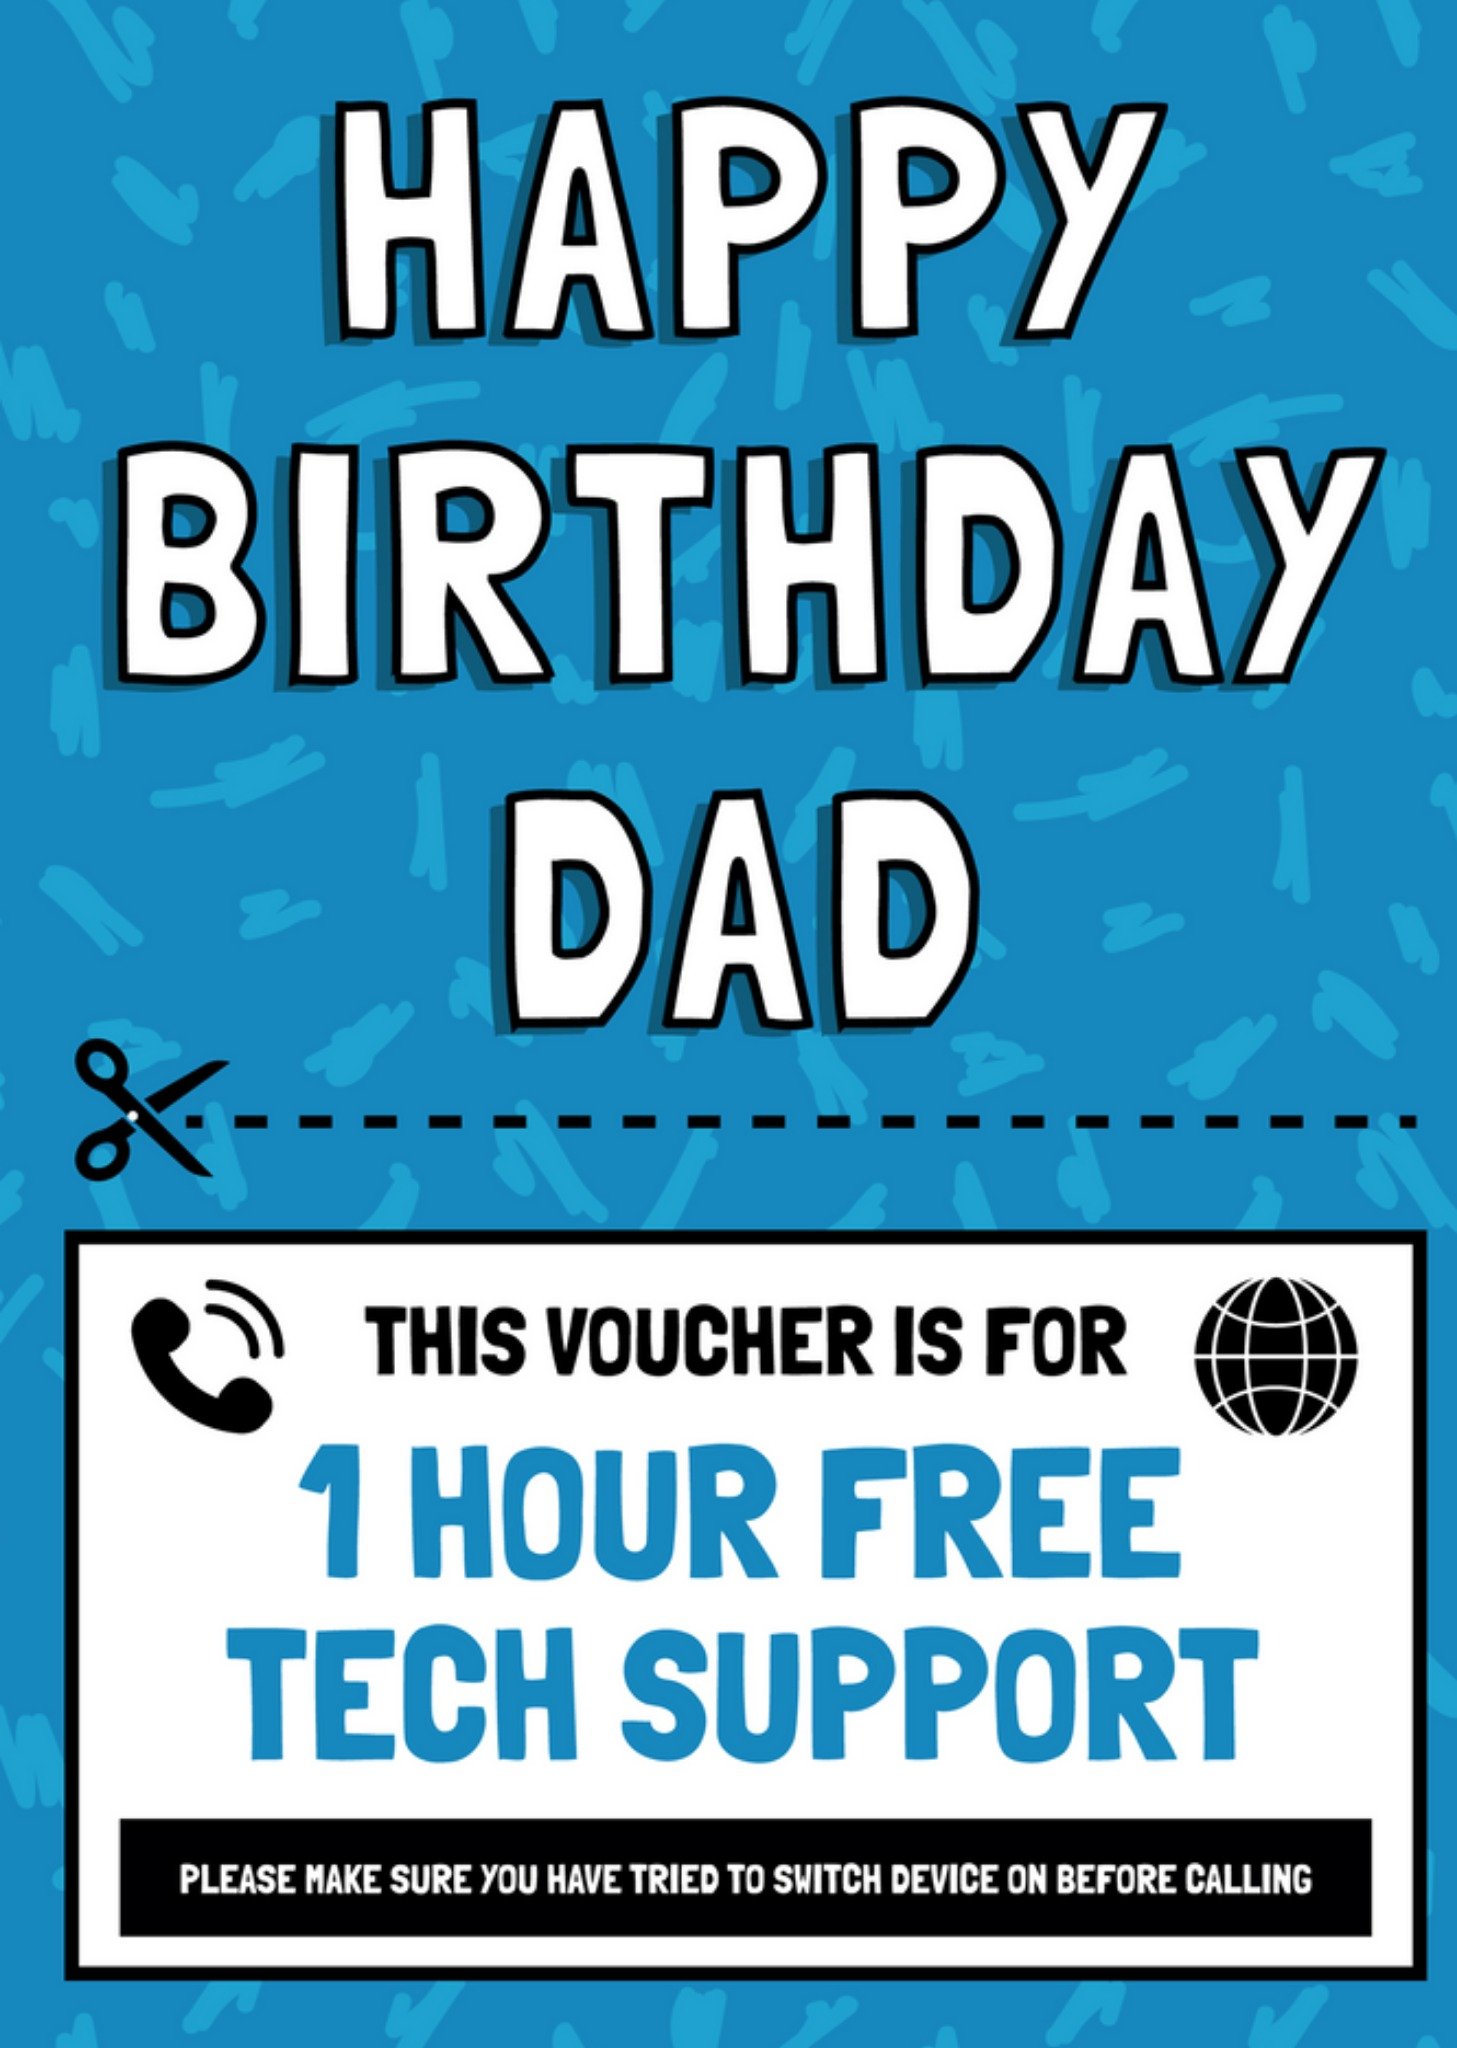 Moonpig Abigolucky Designs Dad This Voucher Is For 1 Hour Free Tech Support Happy Birthday Card Ecar